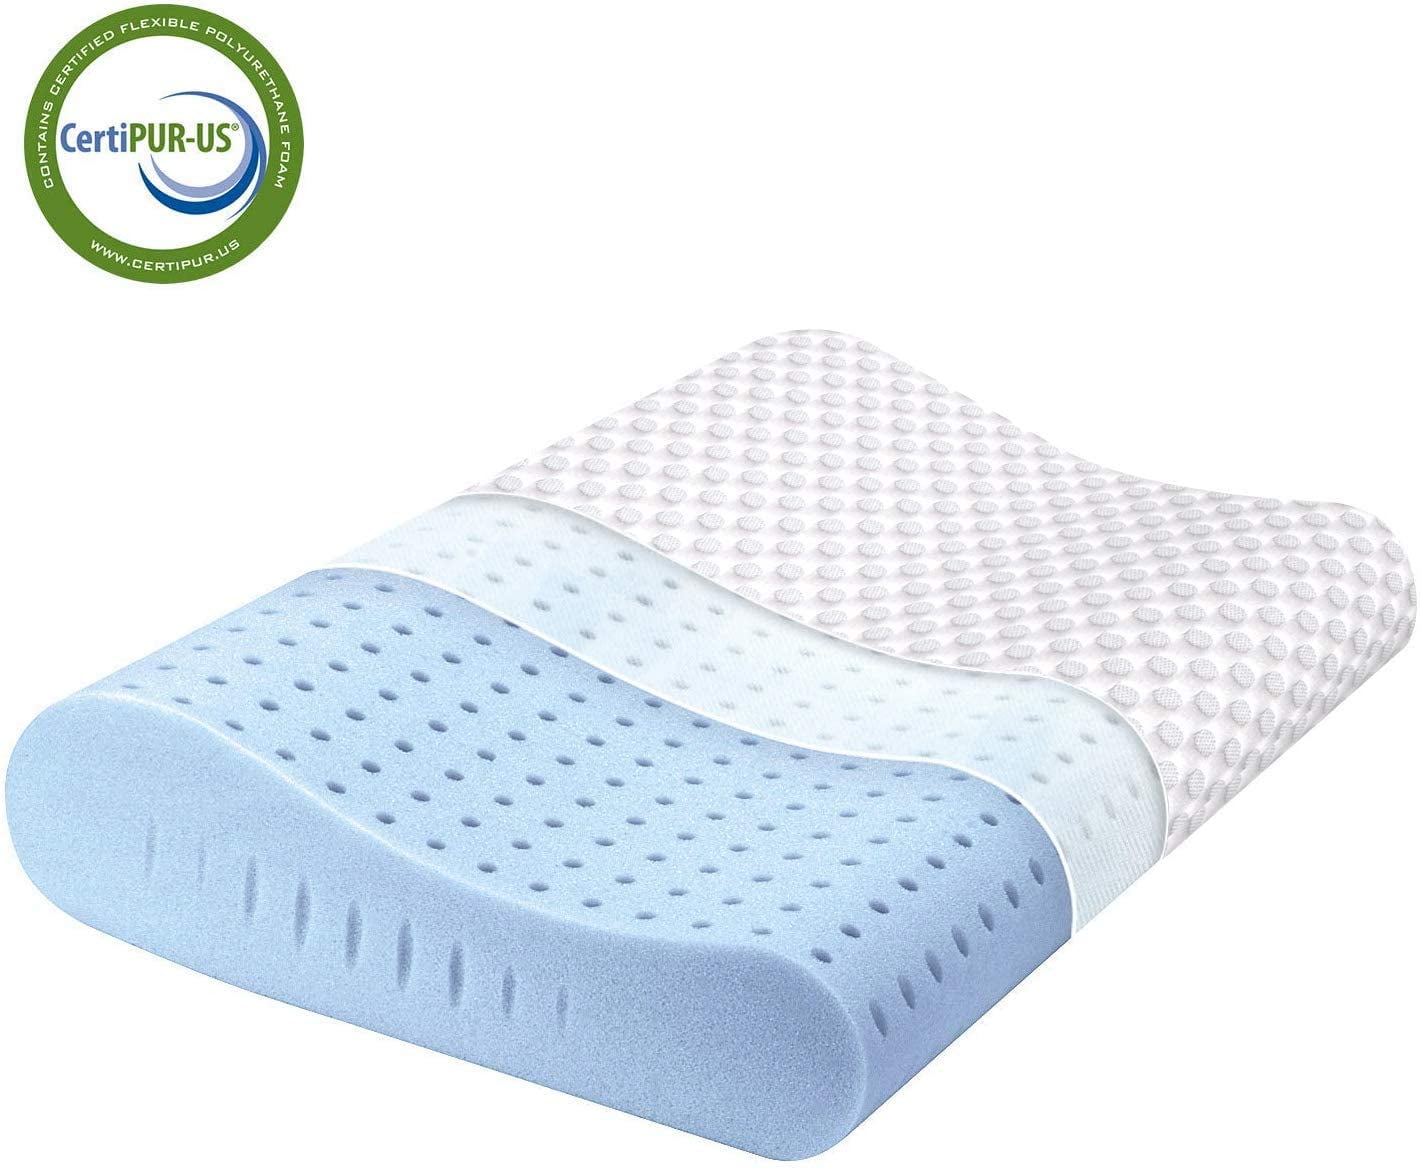 Contour Memory Foam Cooling Gel Pillow Orthopaedic Firm Head Neck Back Support 